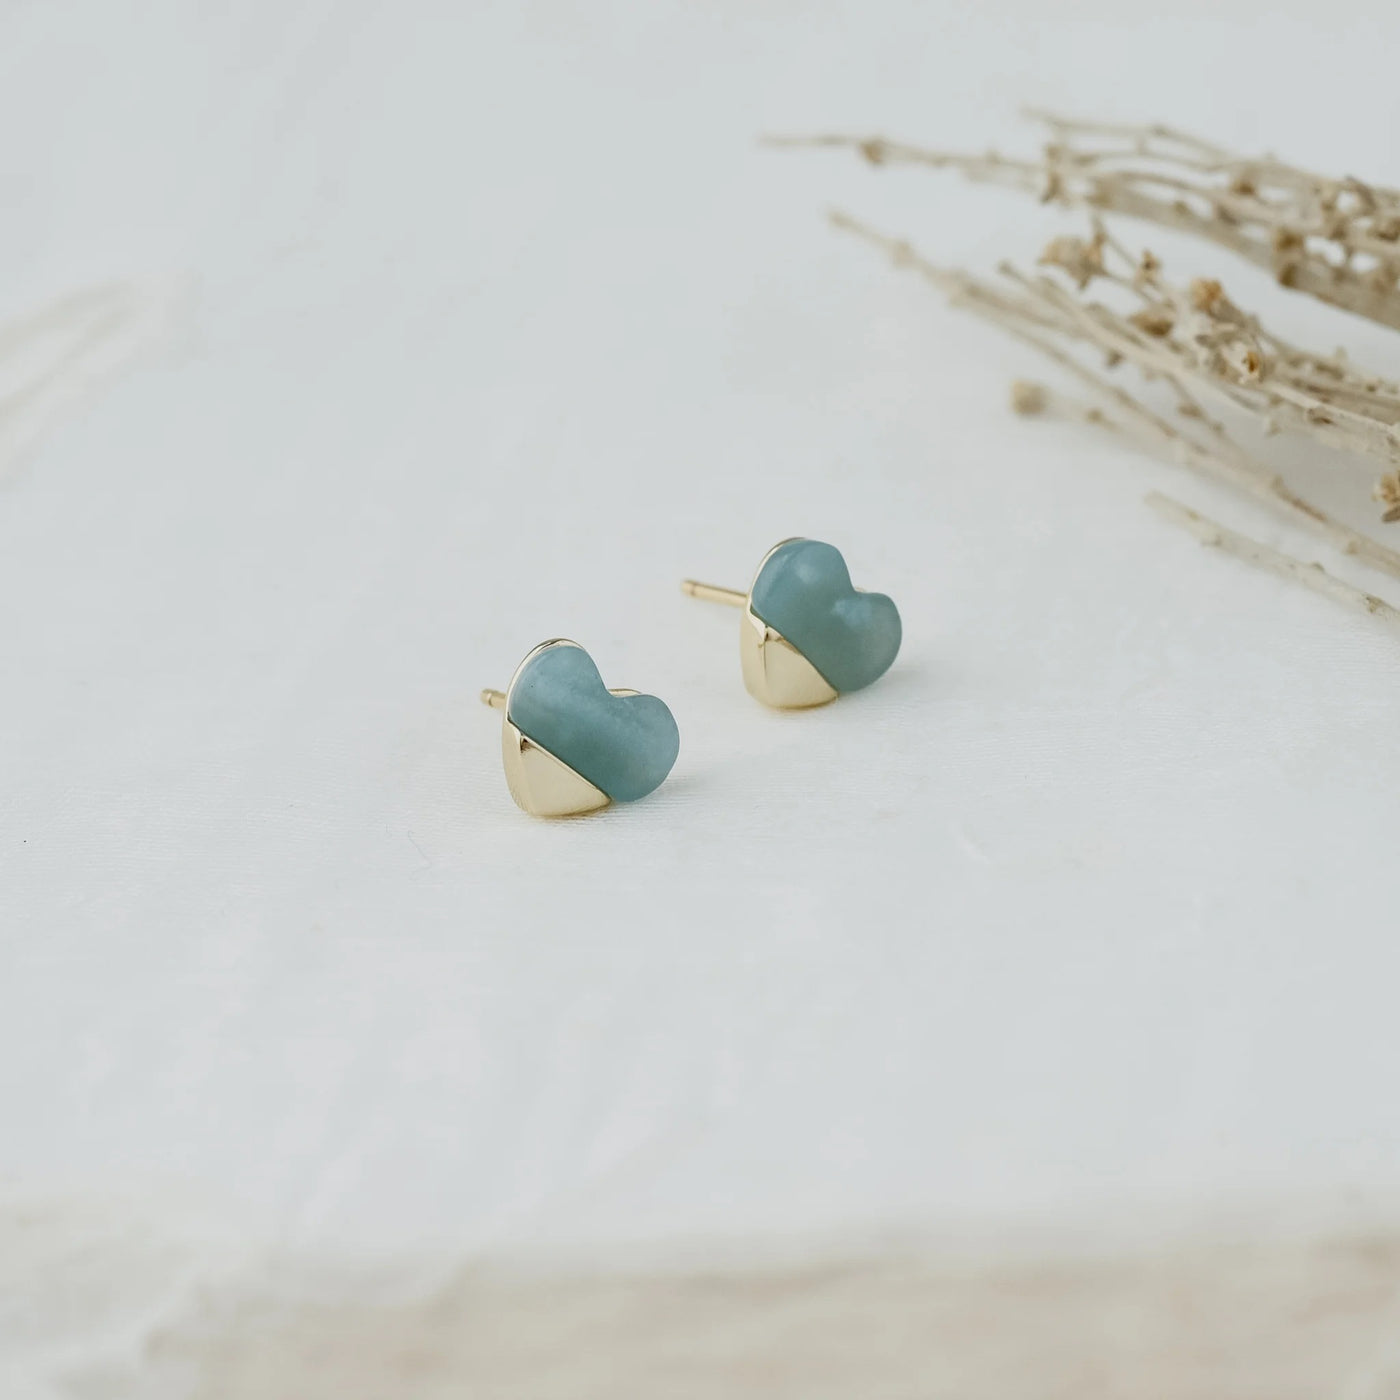 FULL HEART AMAZONITE STUDS - gold or silver